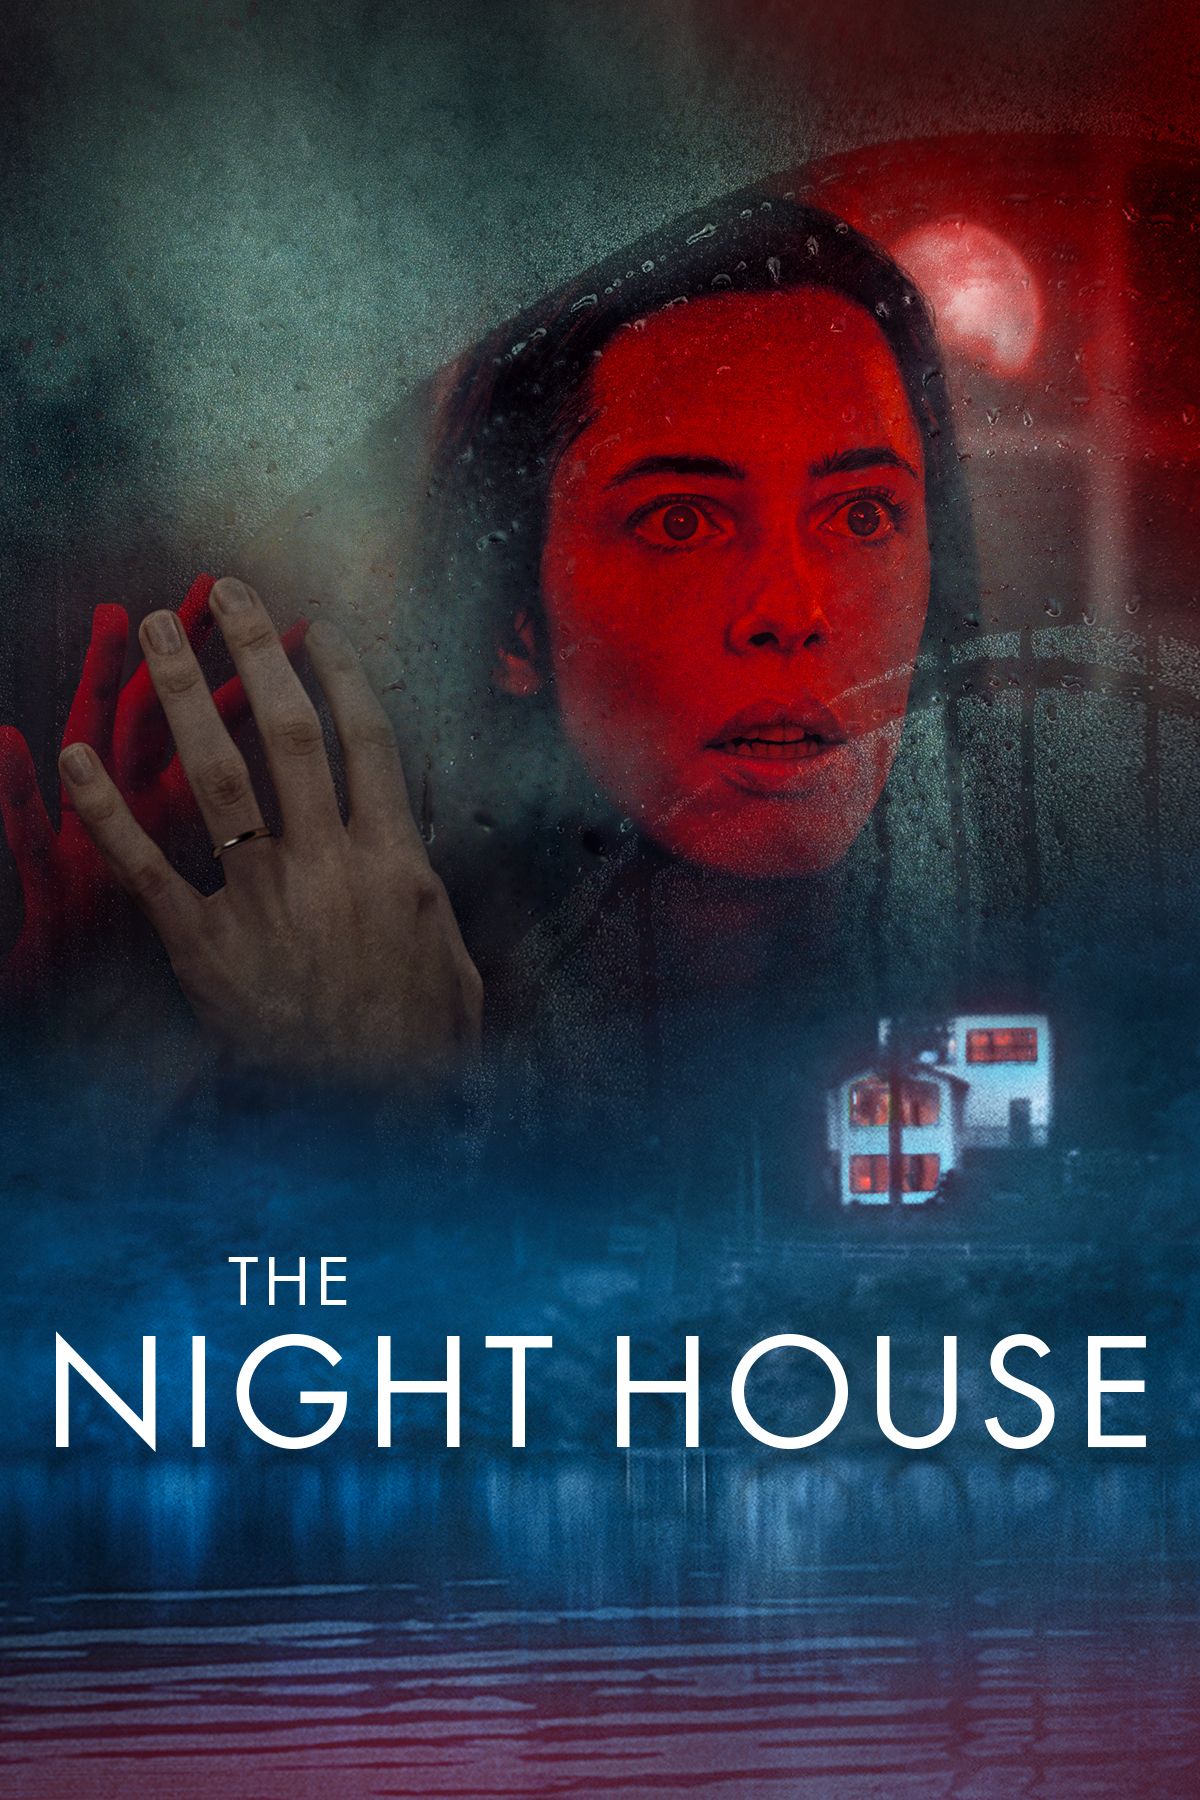 THE NIGHT HOUSE (2021)